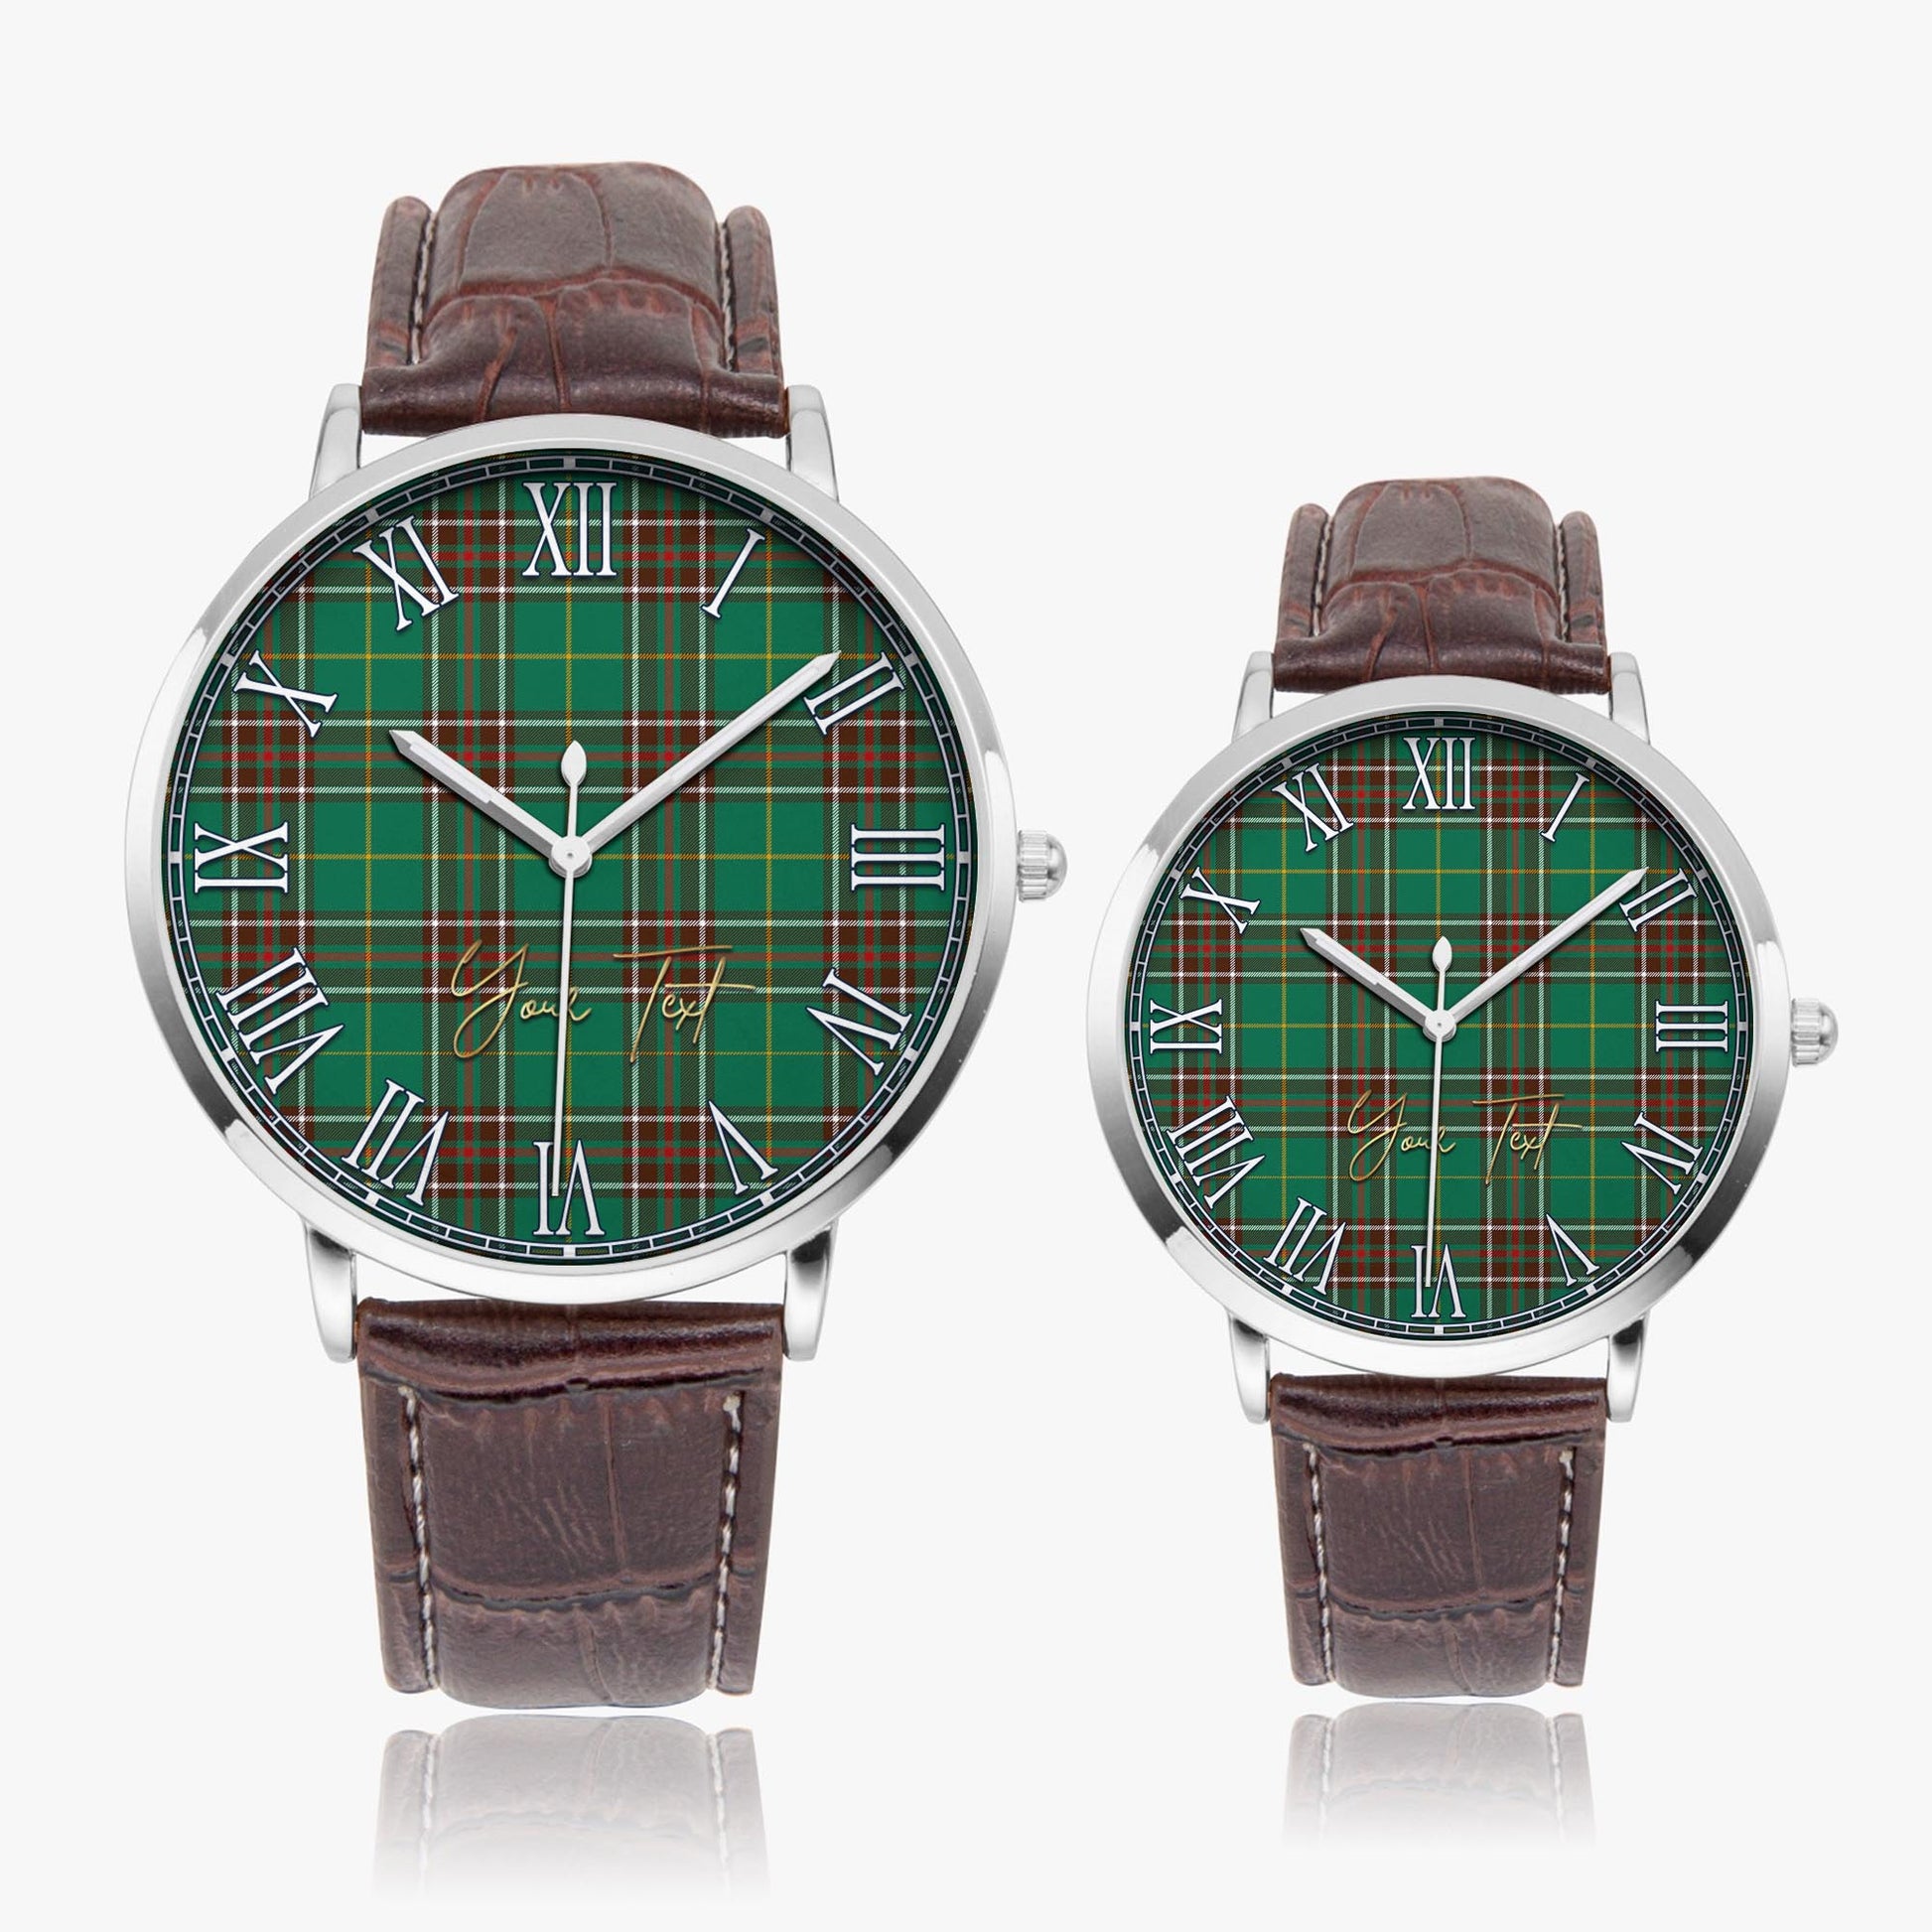 Newfoundland And Labrador Province Canada Tartan Personalized Your Text Leather Trap Quartz Watch Ultra Thin Silver Case With Brown Leather Strap - Tartanvibesclothing